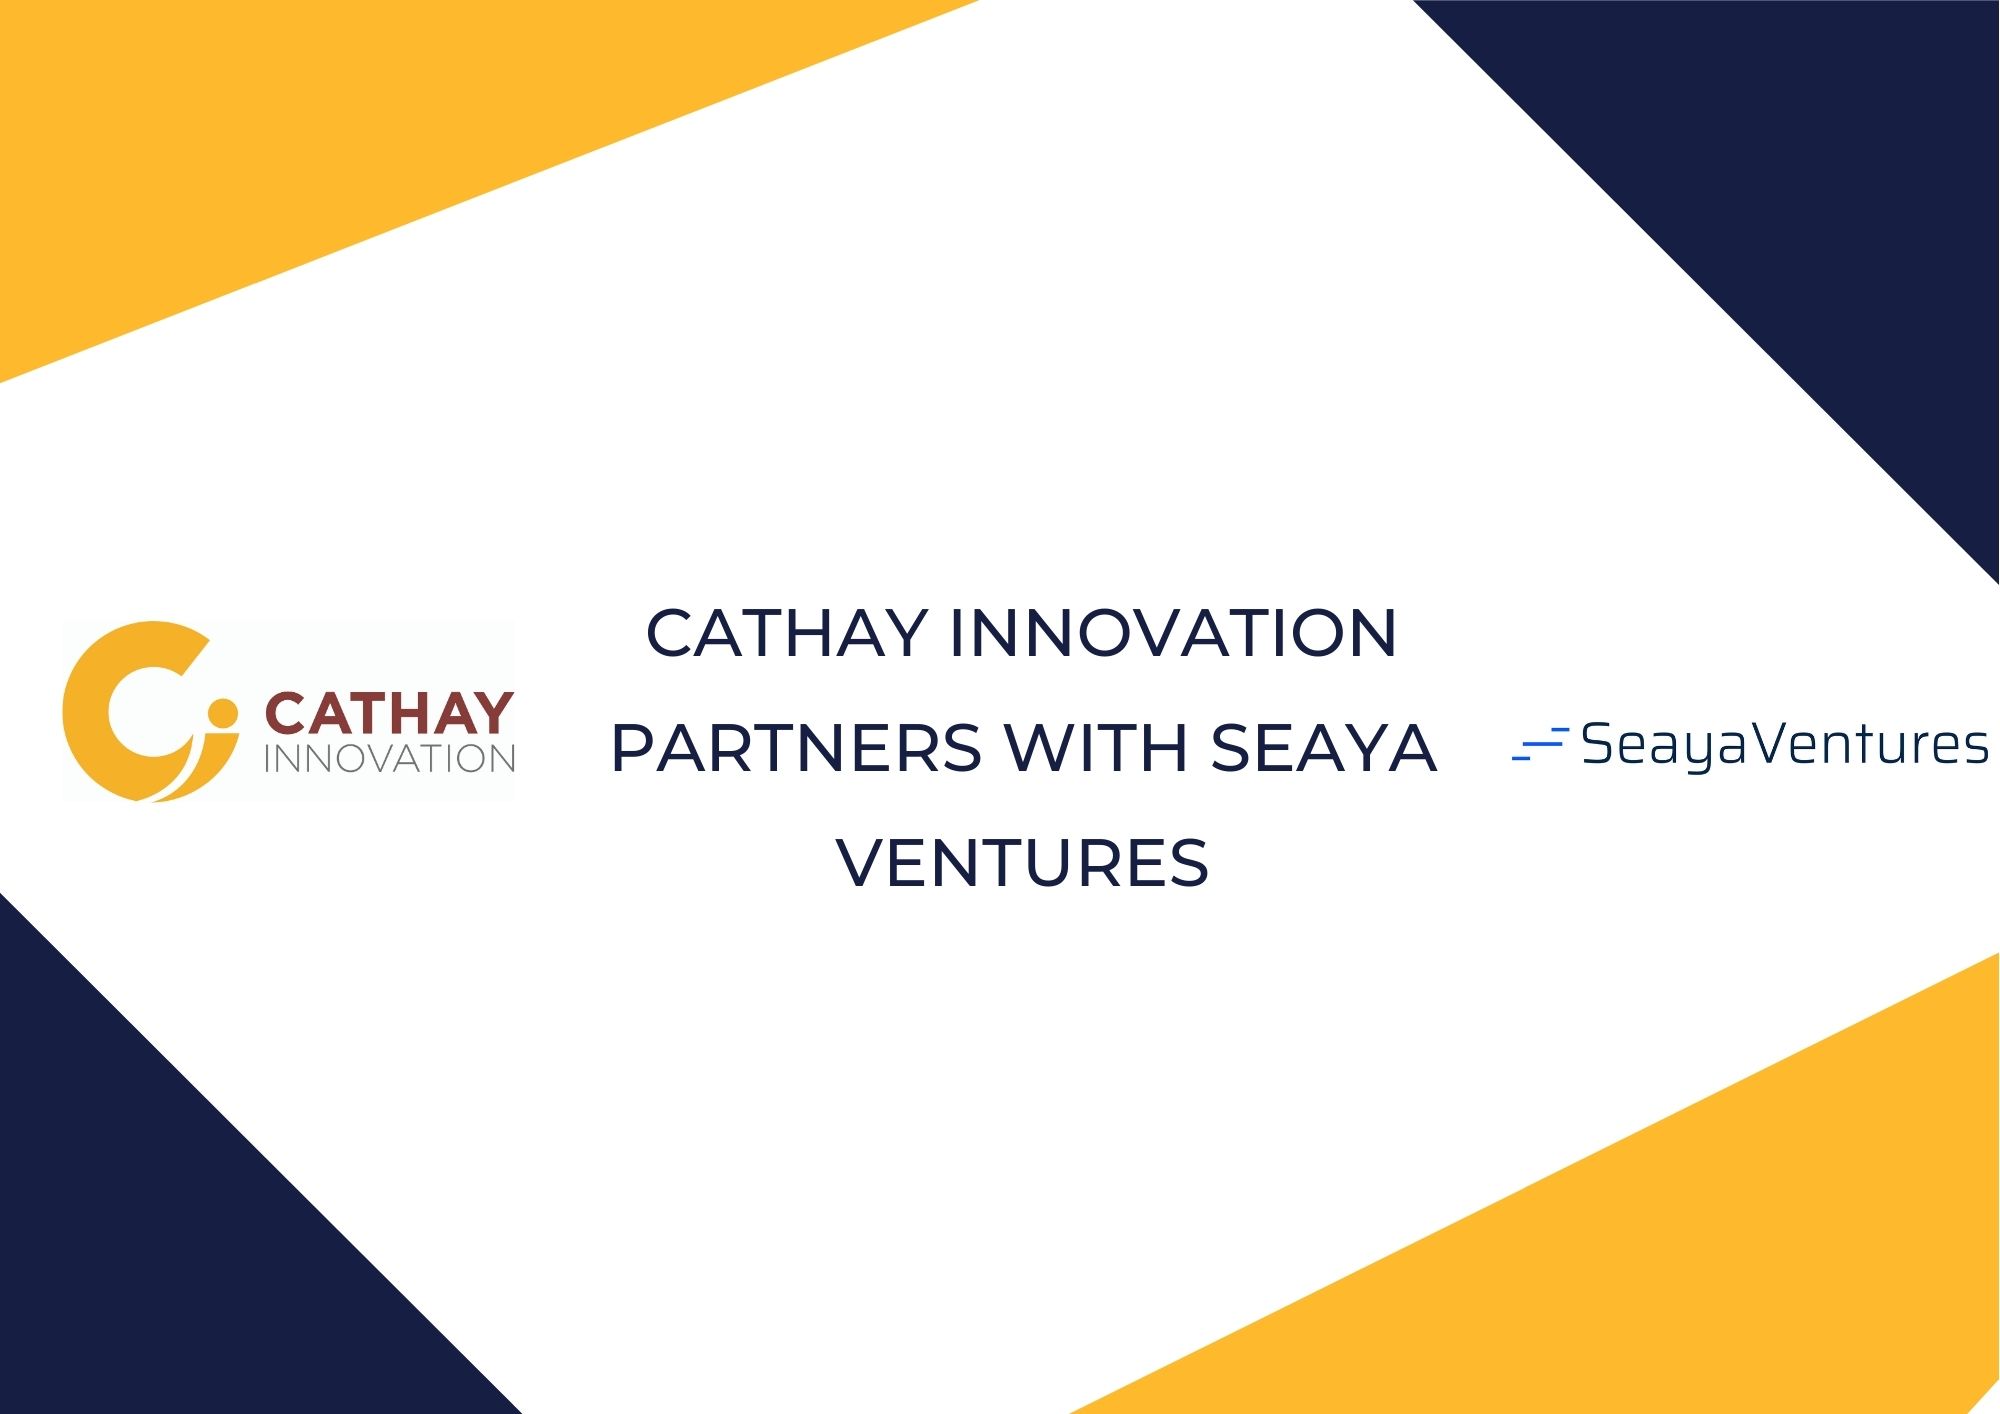 Cathay Innovation Partners with Seaya Ventures